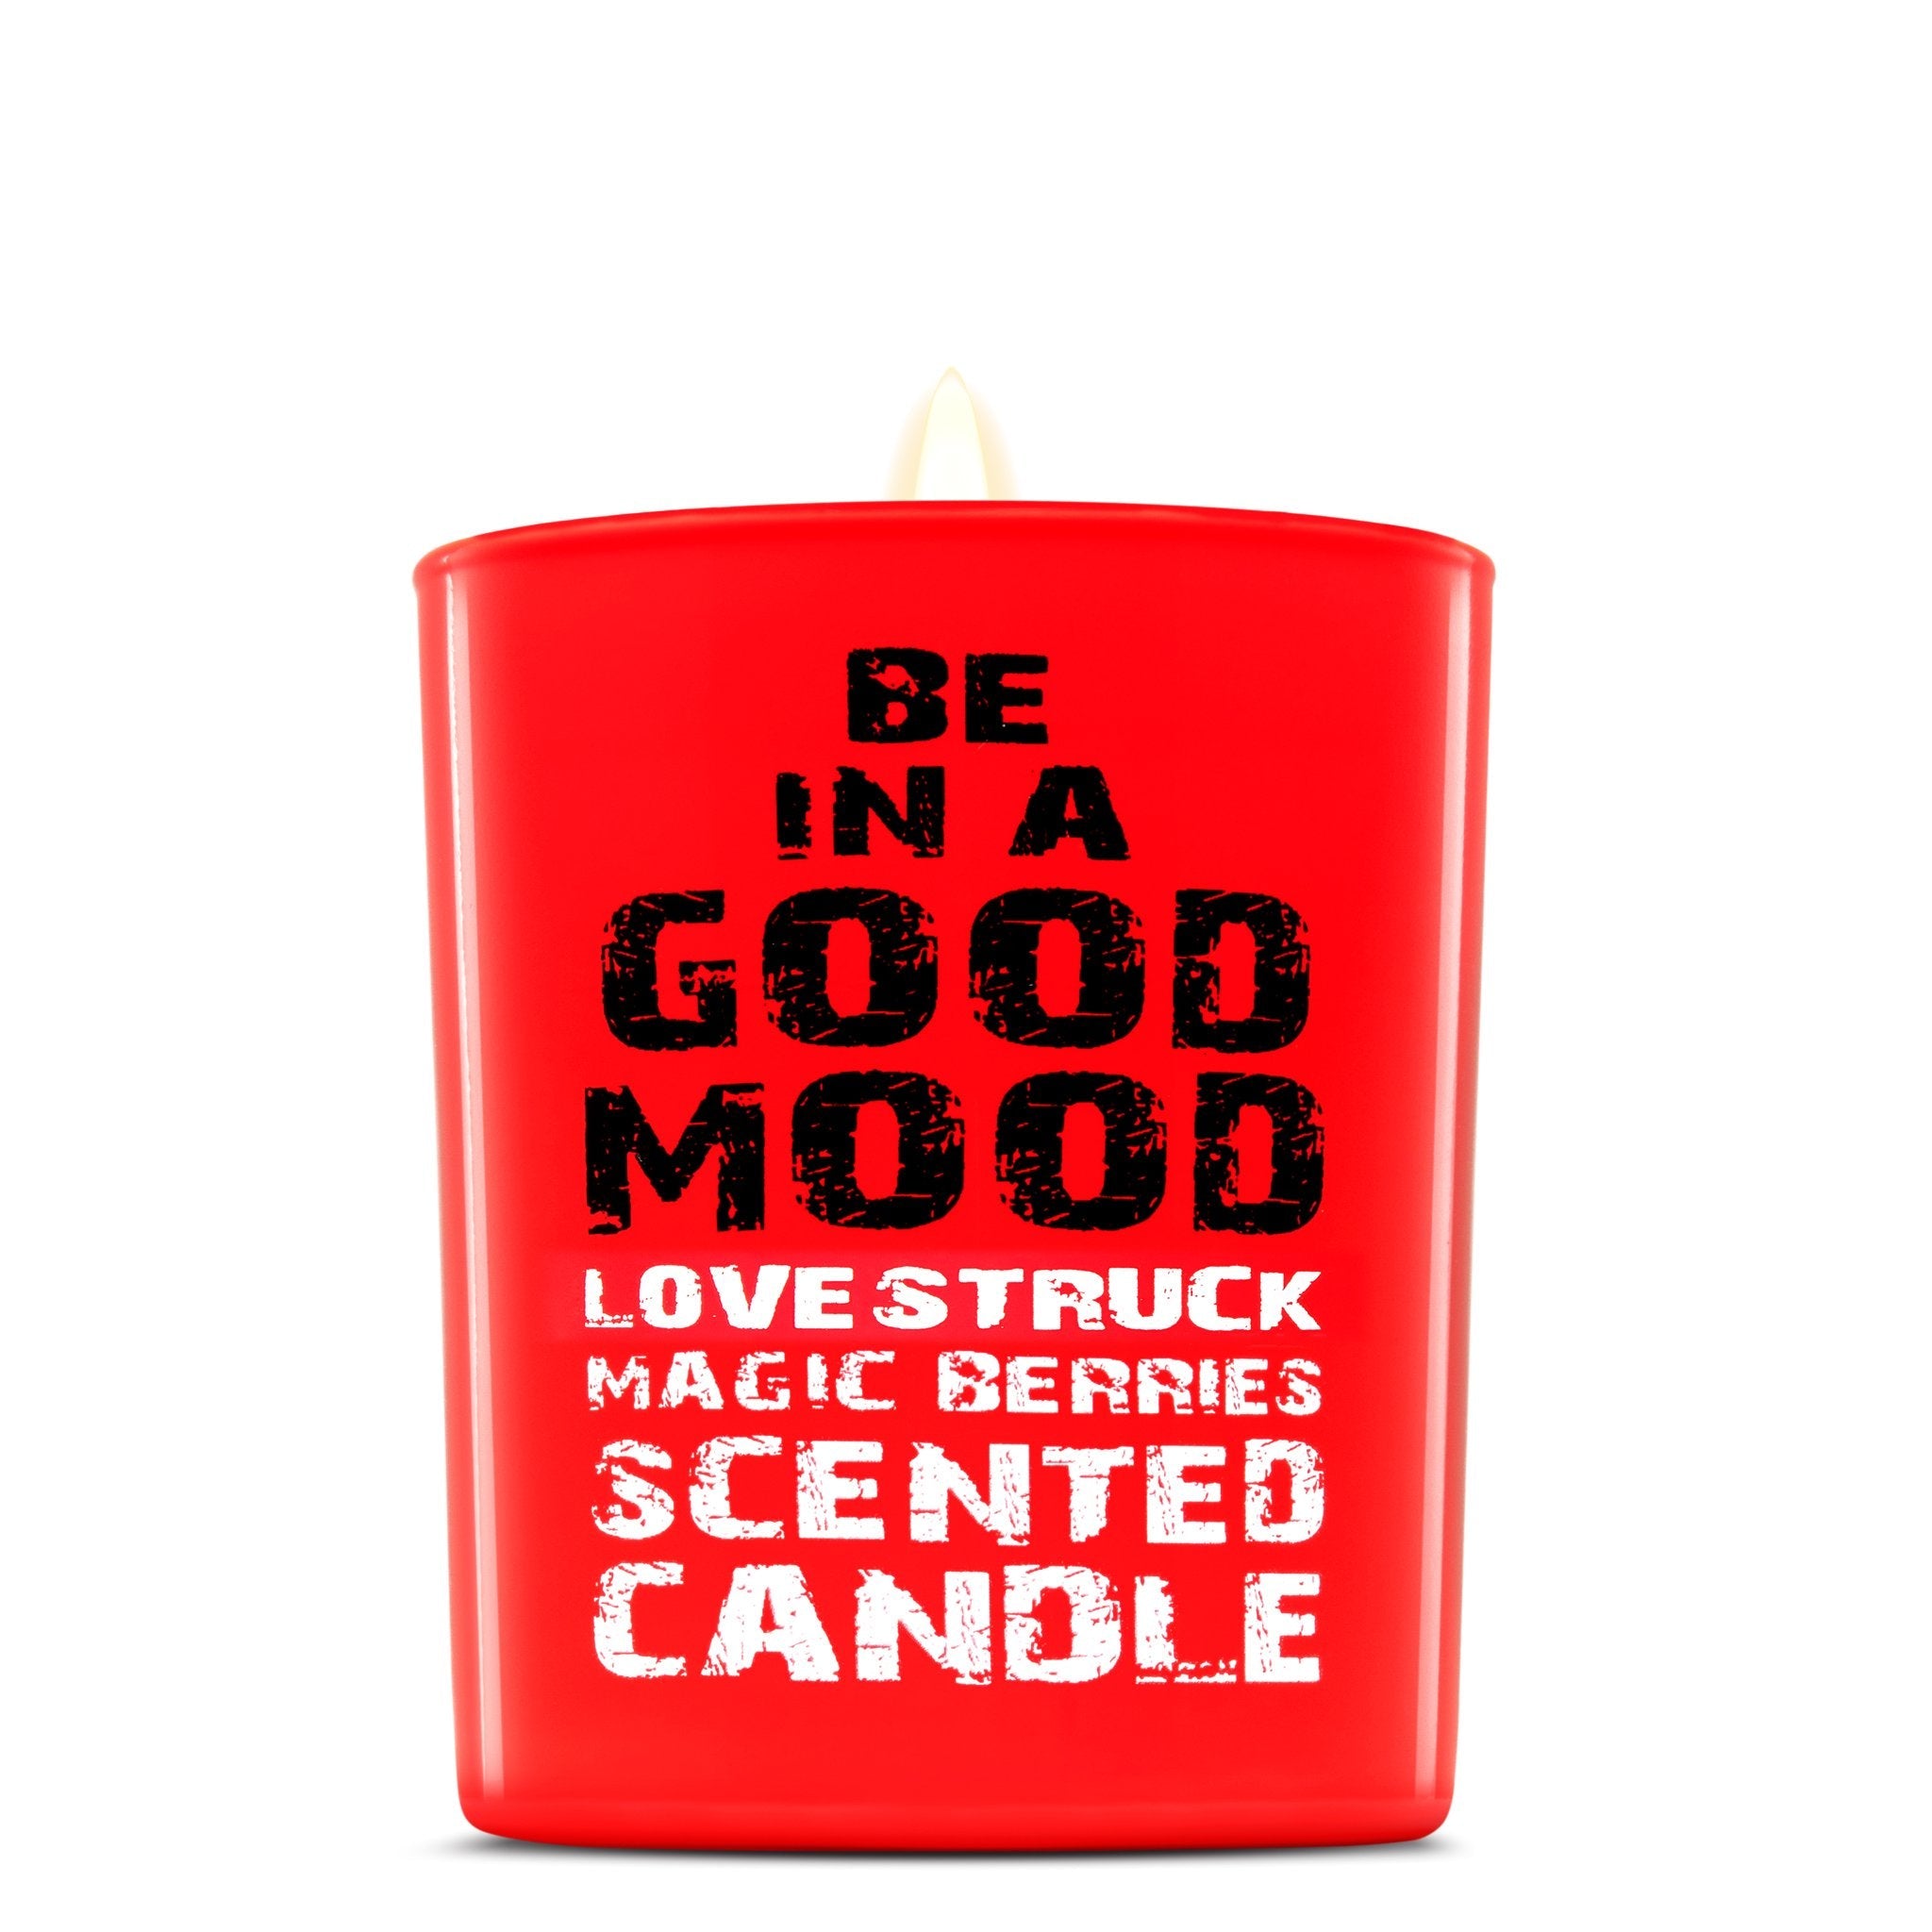 Be in a Good Mood Lovestruck Scented Candle - MeMeMe Home And Beauty